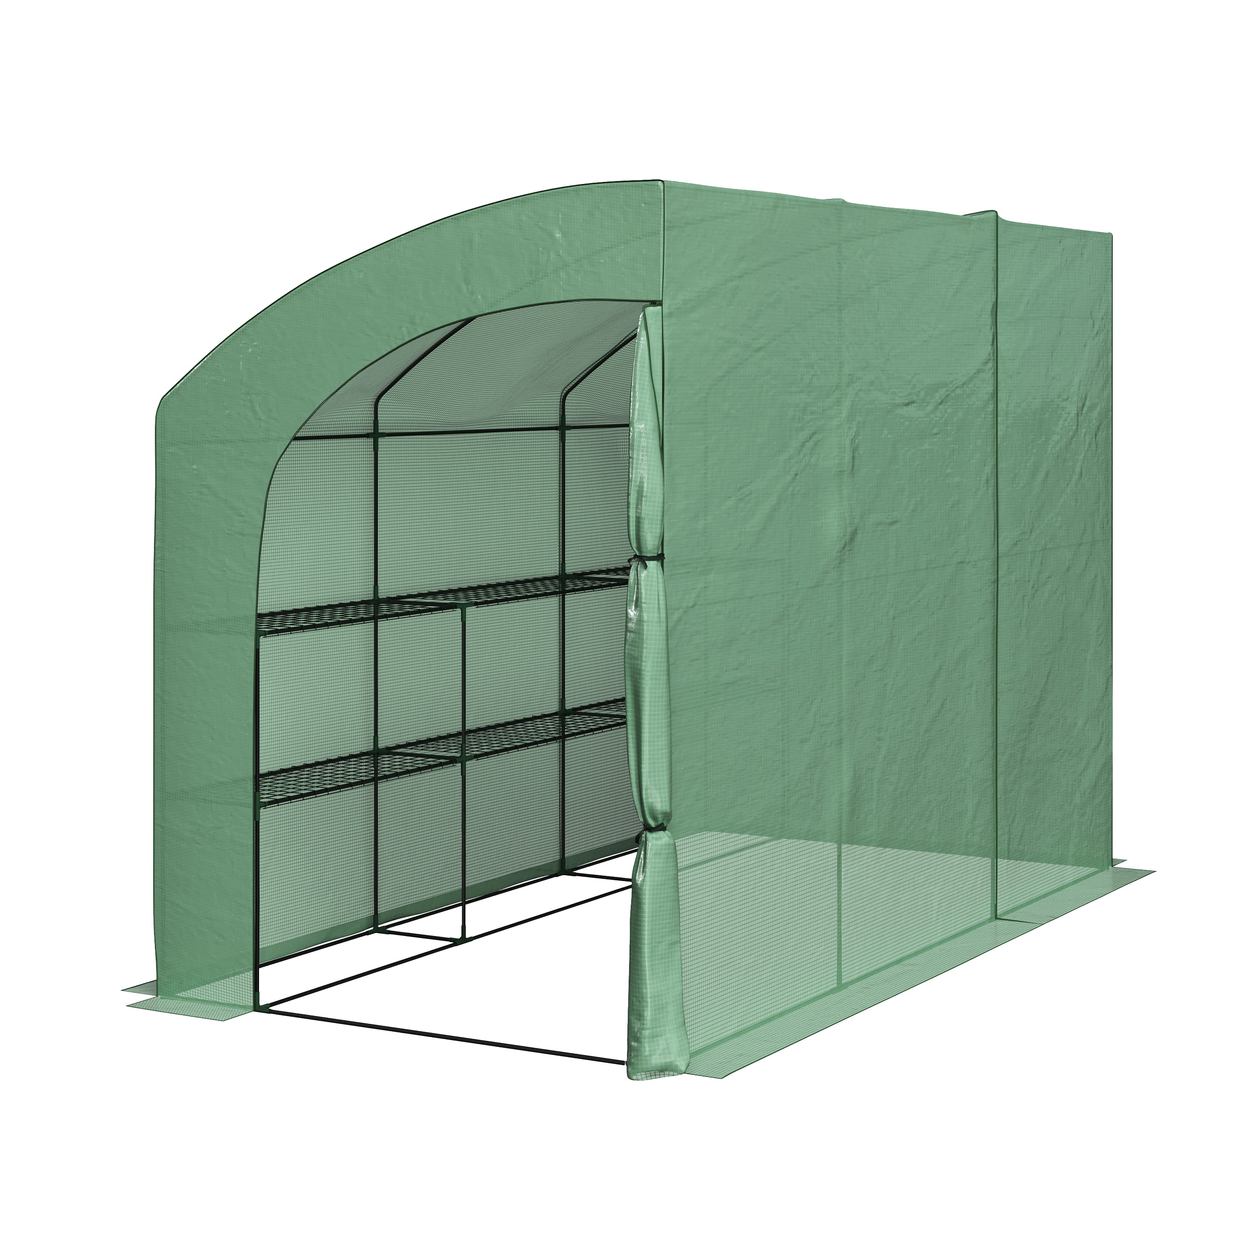 Lean To Greenhouse 10ft X 5ft X 7ft Green House With Doors And 6 Shelves, Green